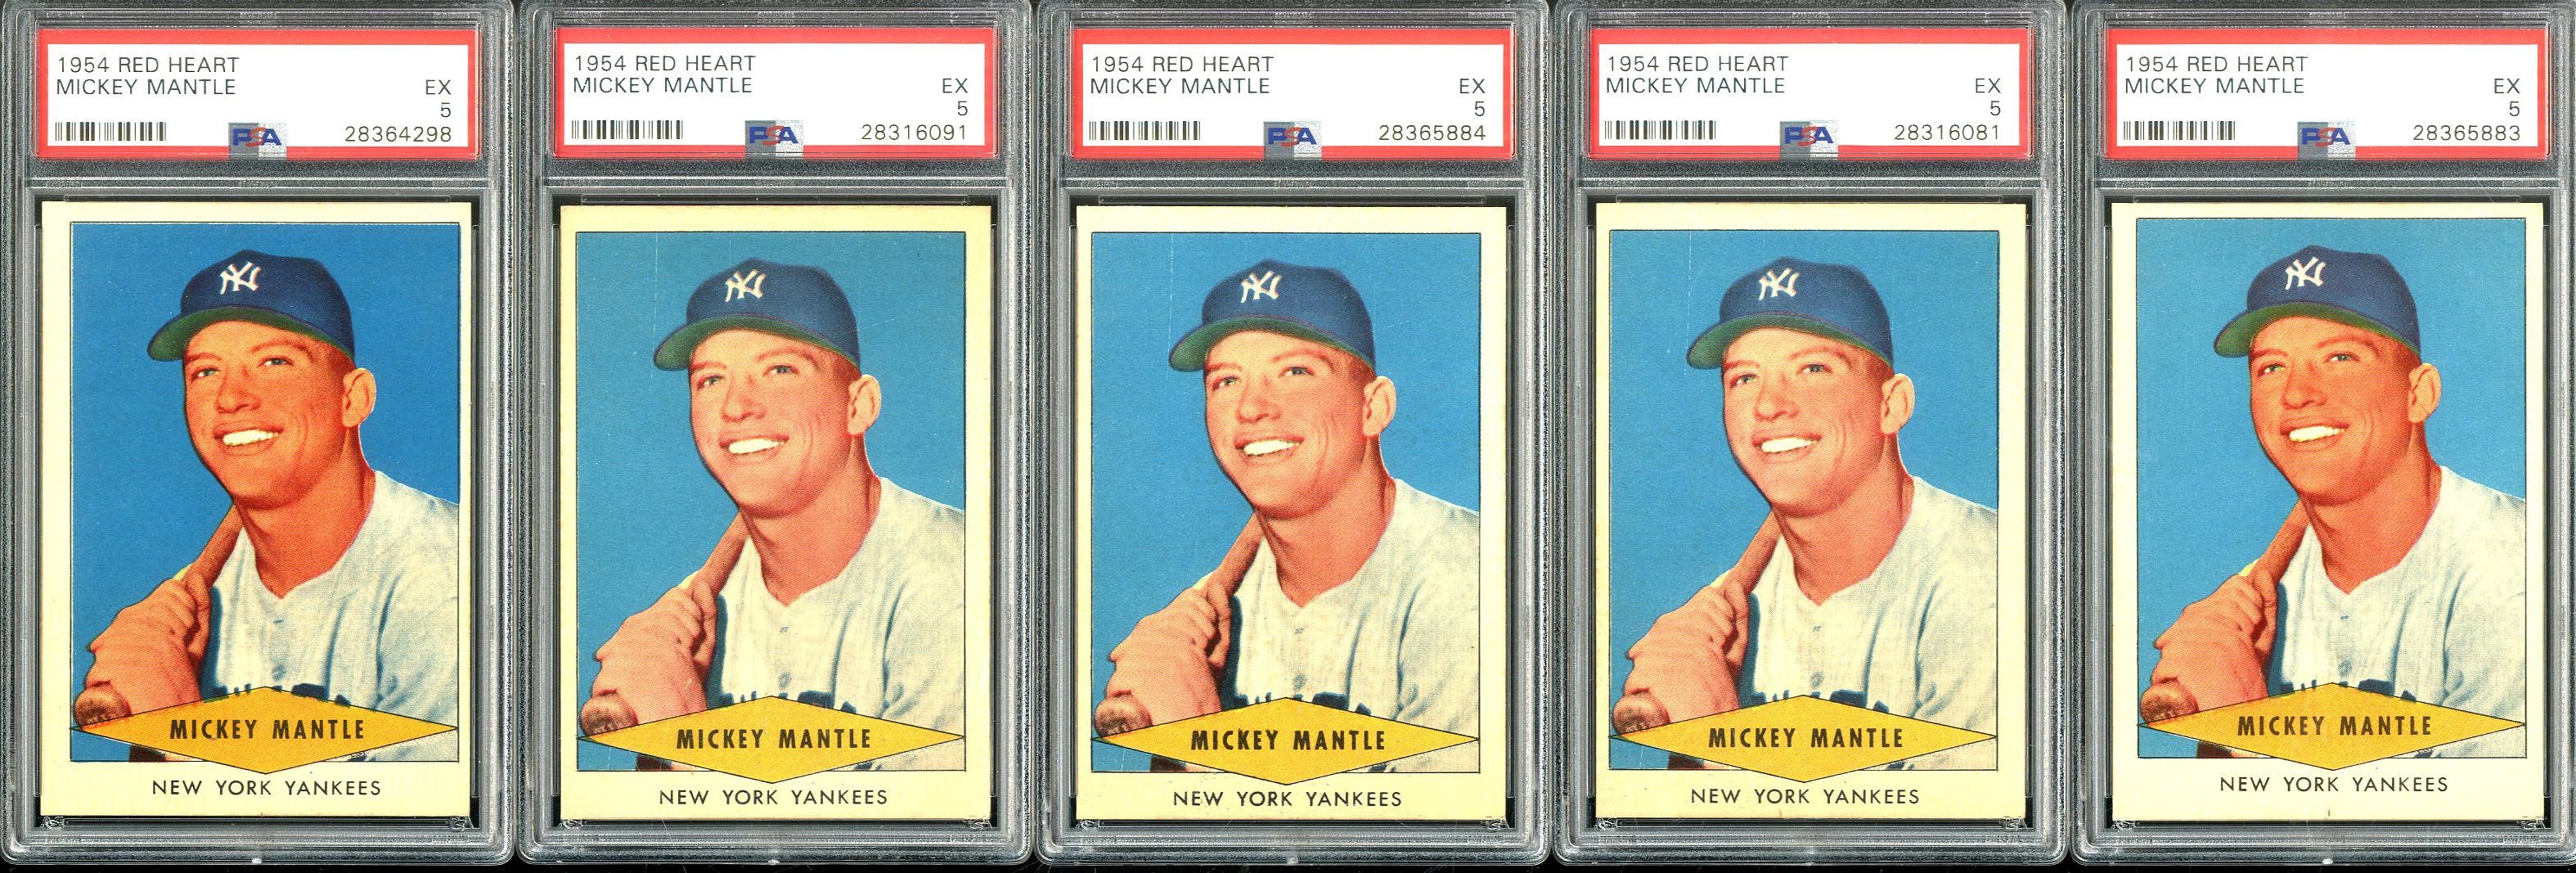 - 1954 Red Heart Mickey Mantle PSA Graded Lot (5)